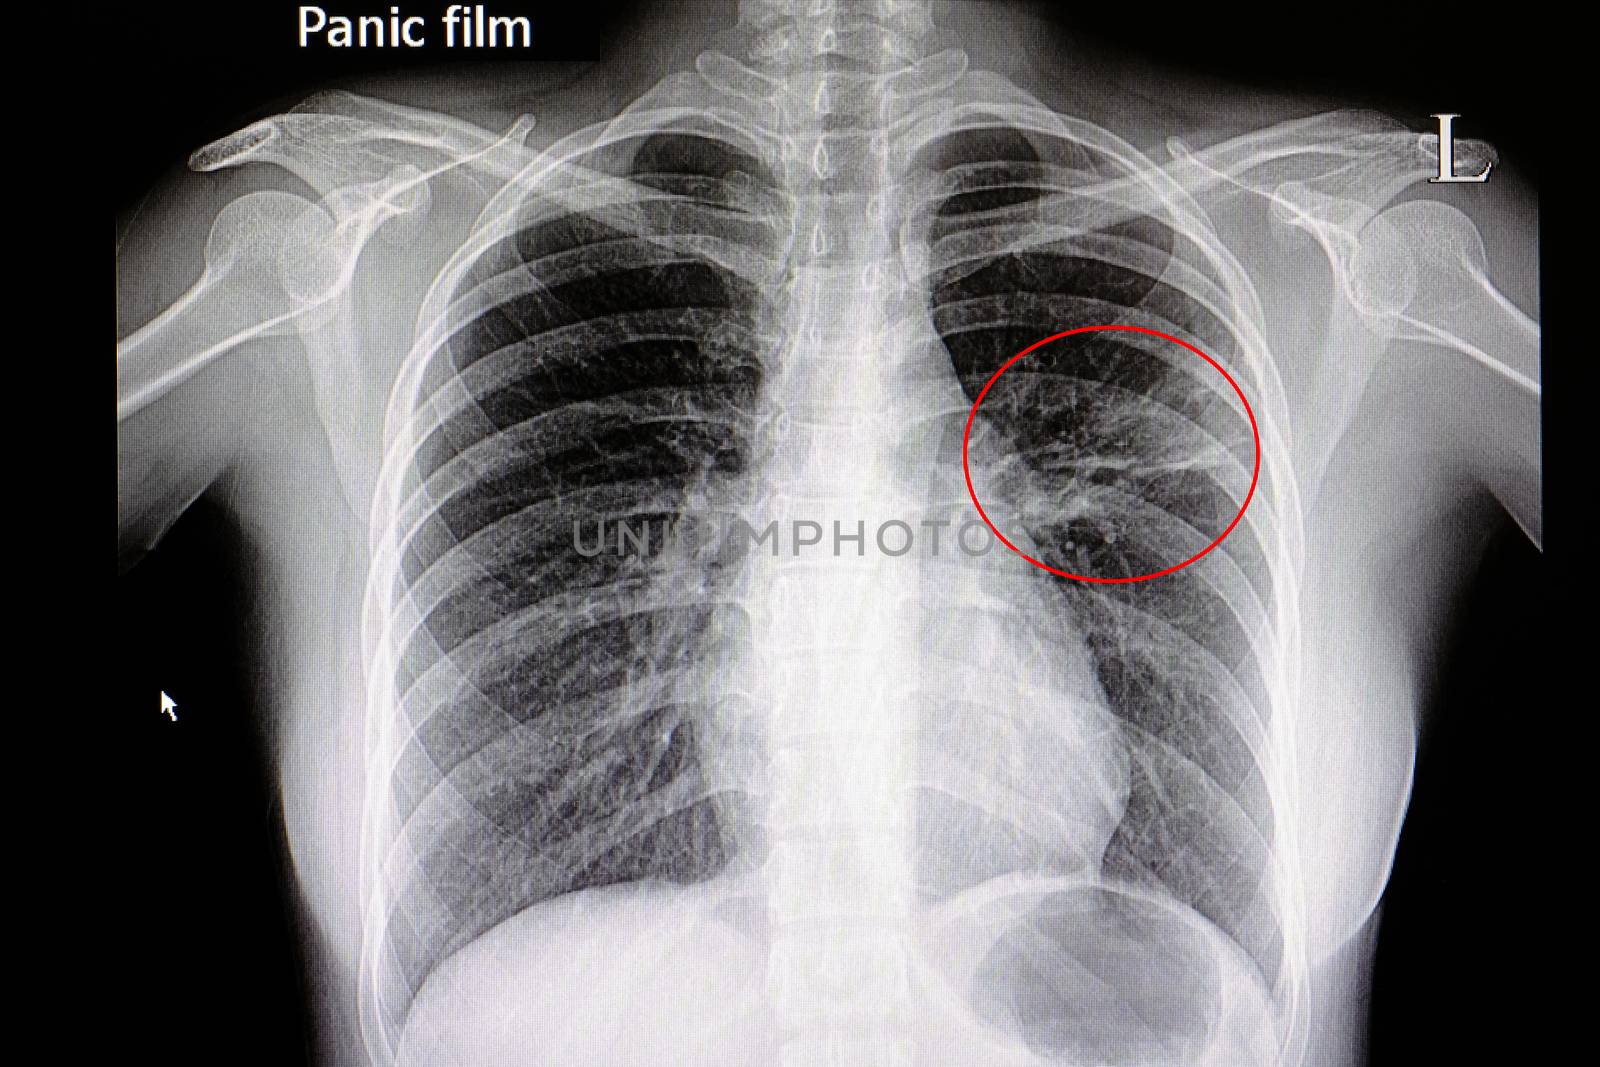 Xray film of a patient with pneumonia in his left middle lung